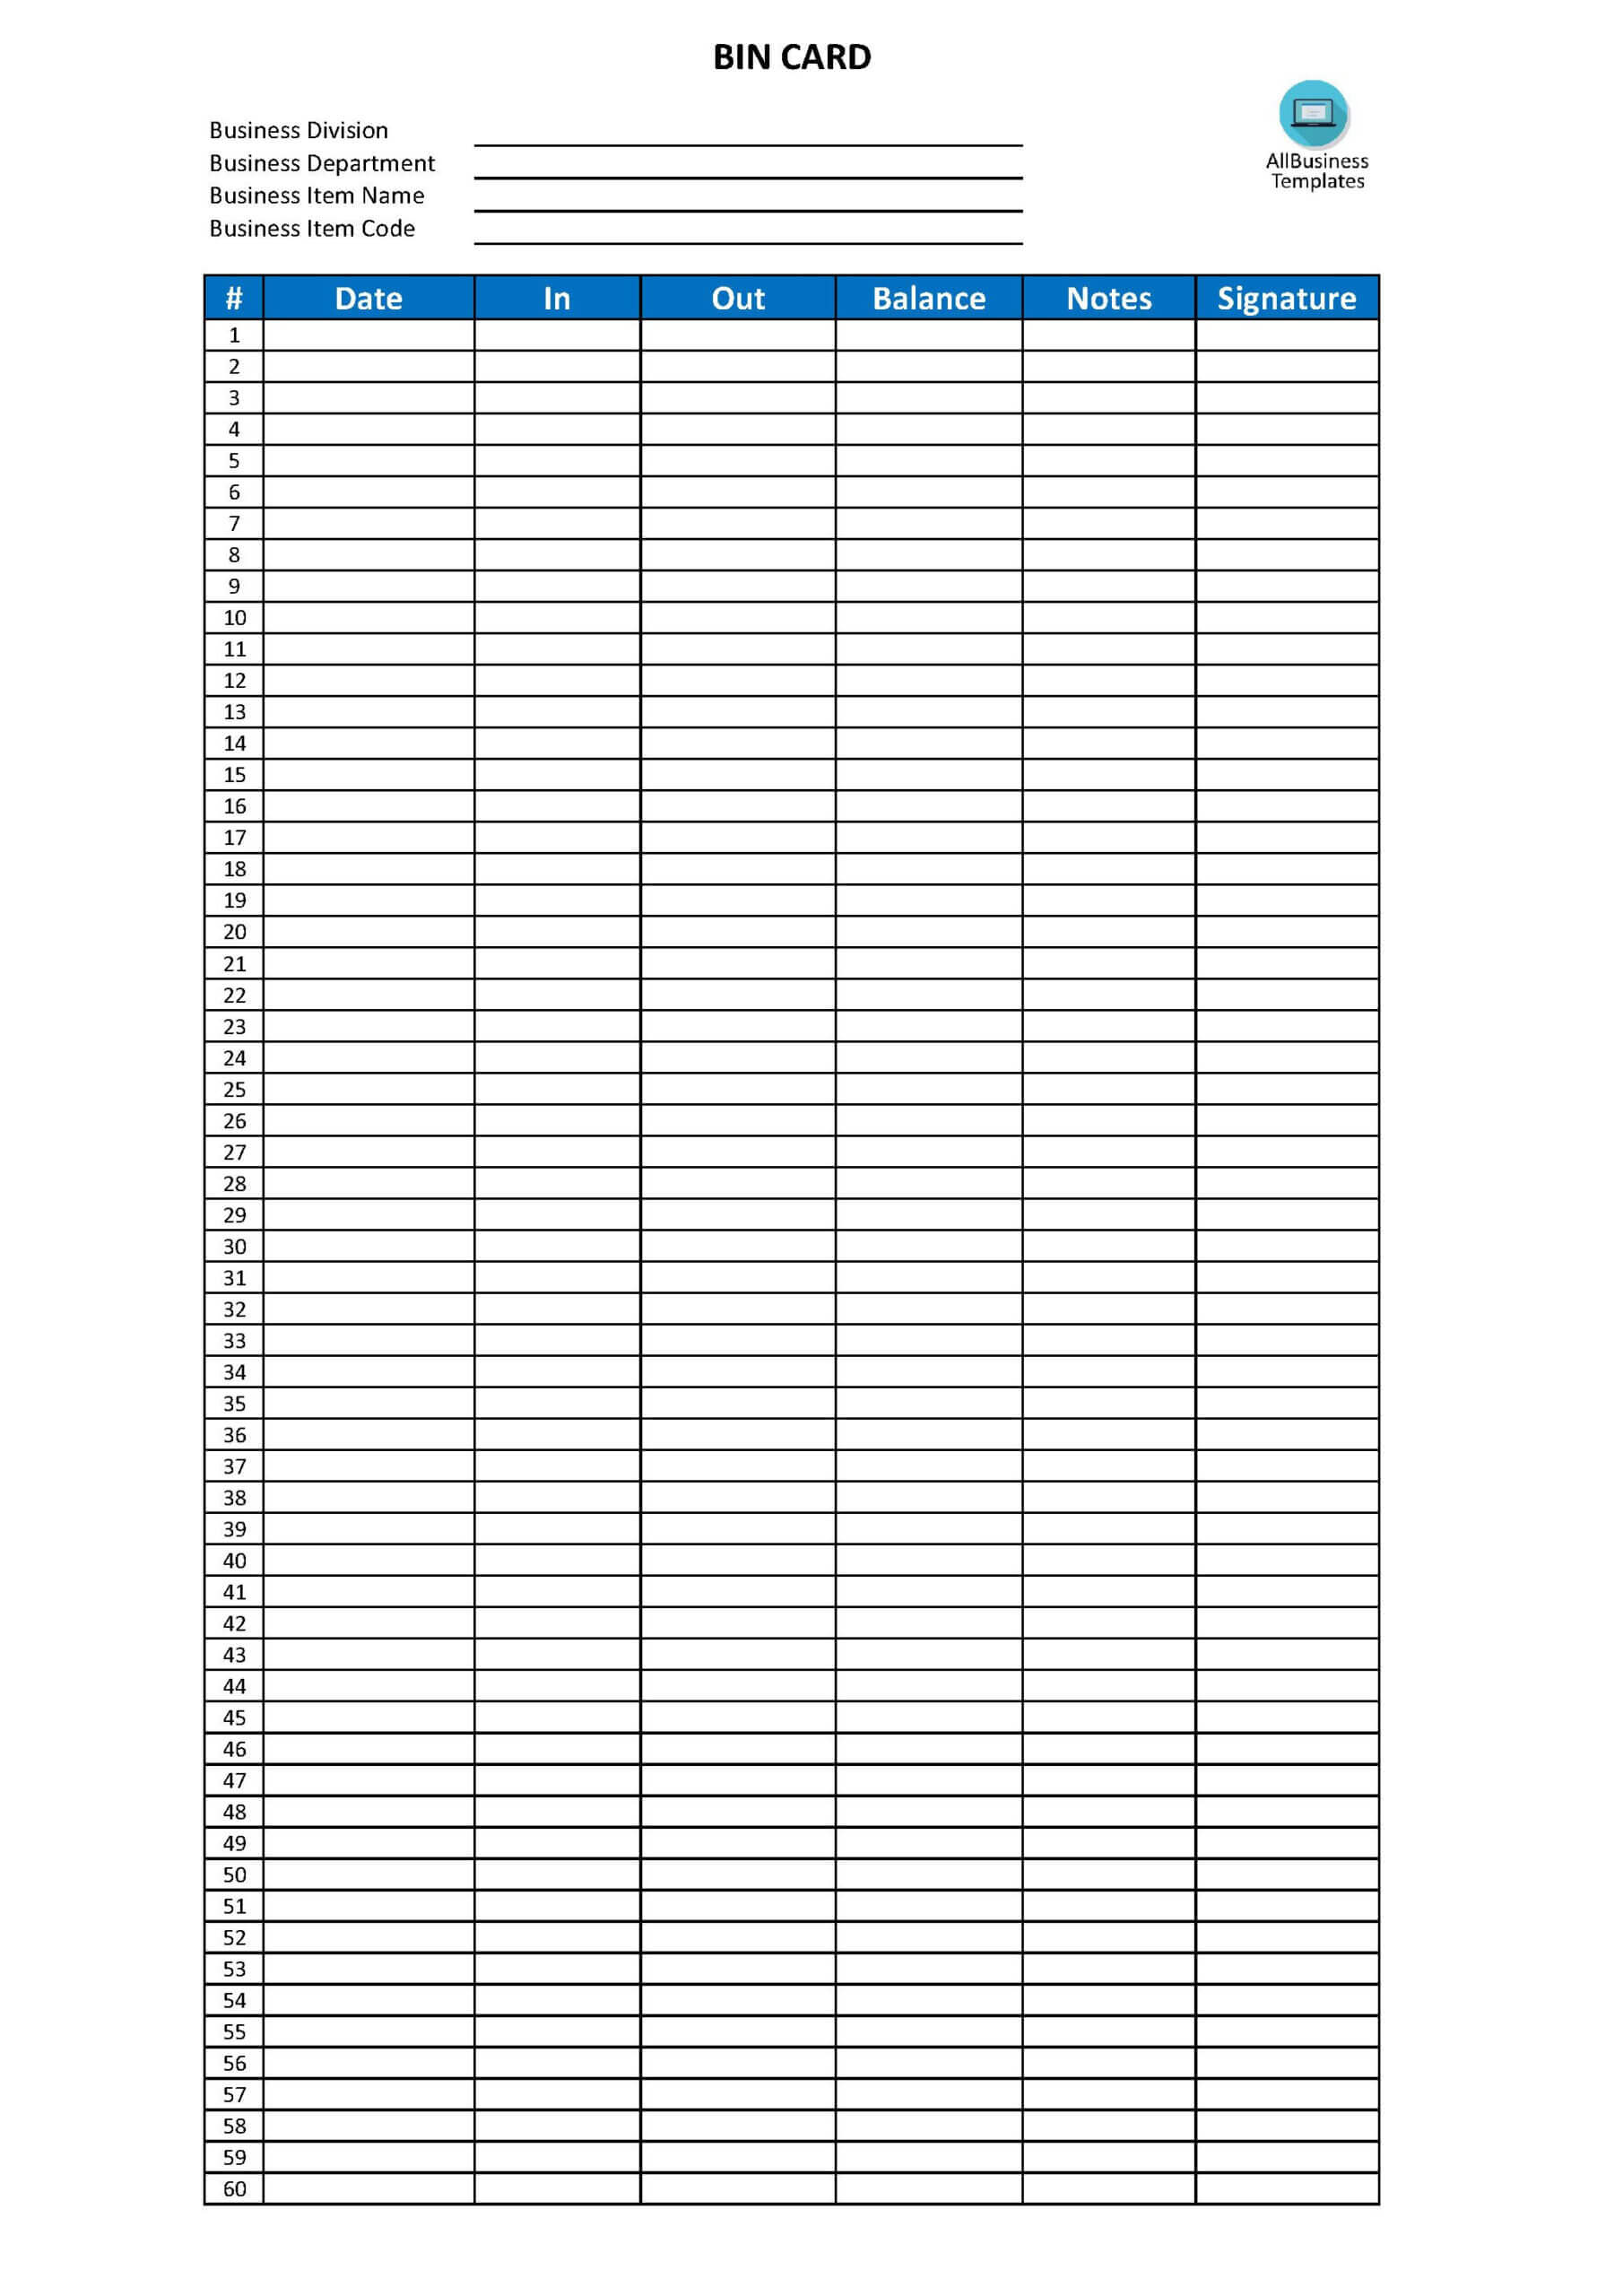 Bin Card Format Excel - Are You Managing A Store And Like To Throughout Bin Card Template